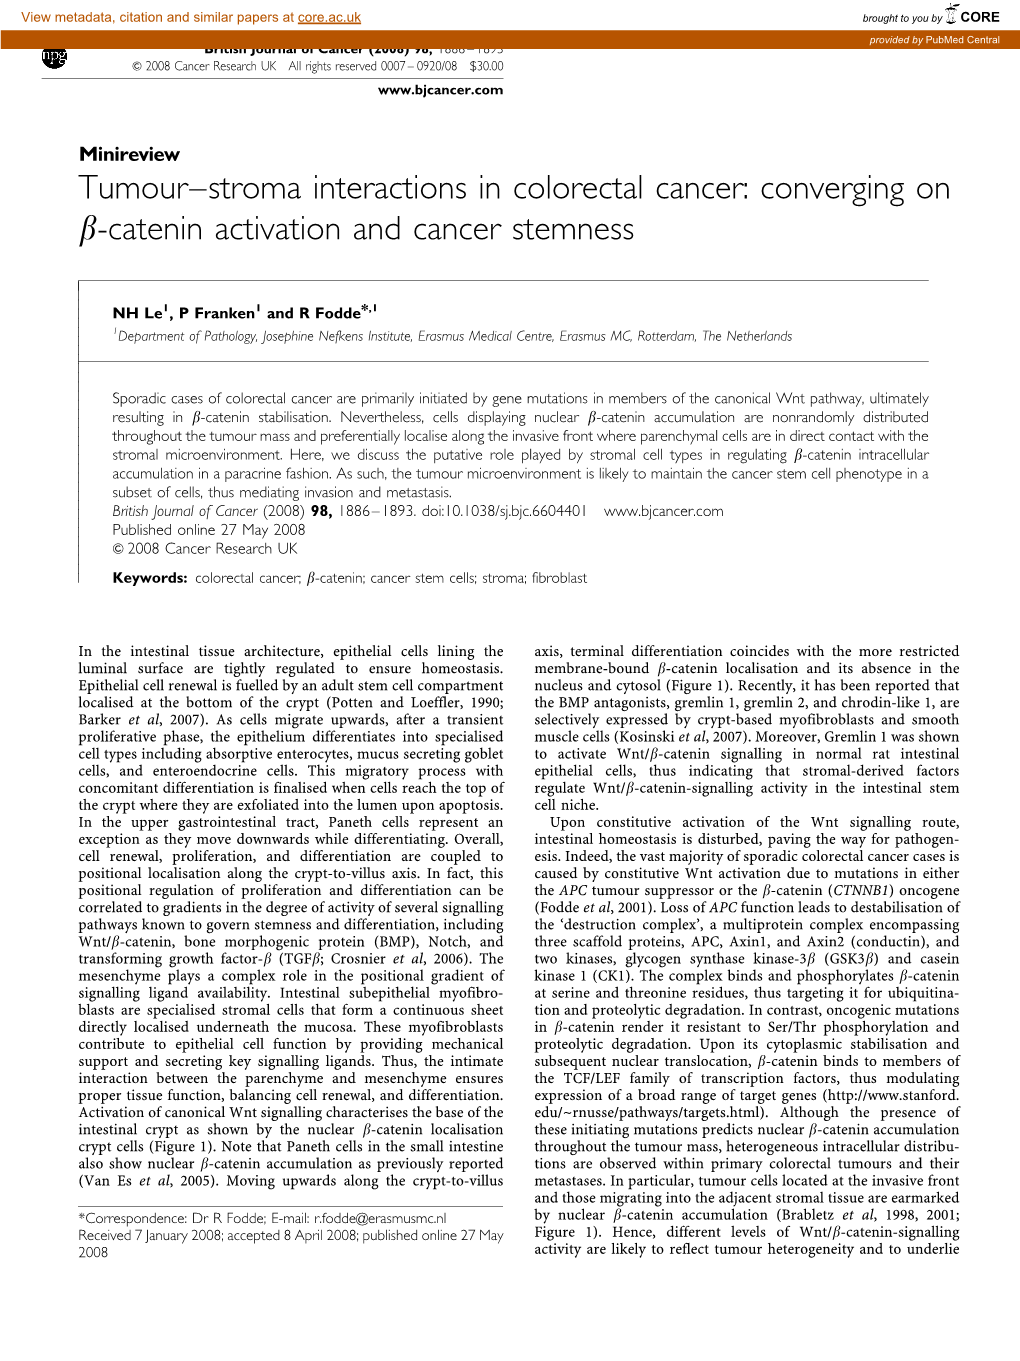 Converging on B-Catenin Activation and Cancer Stemness